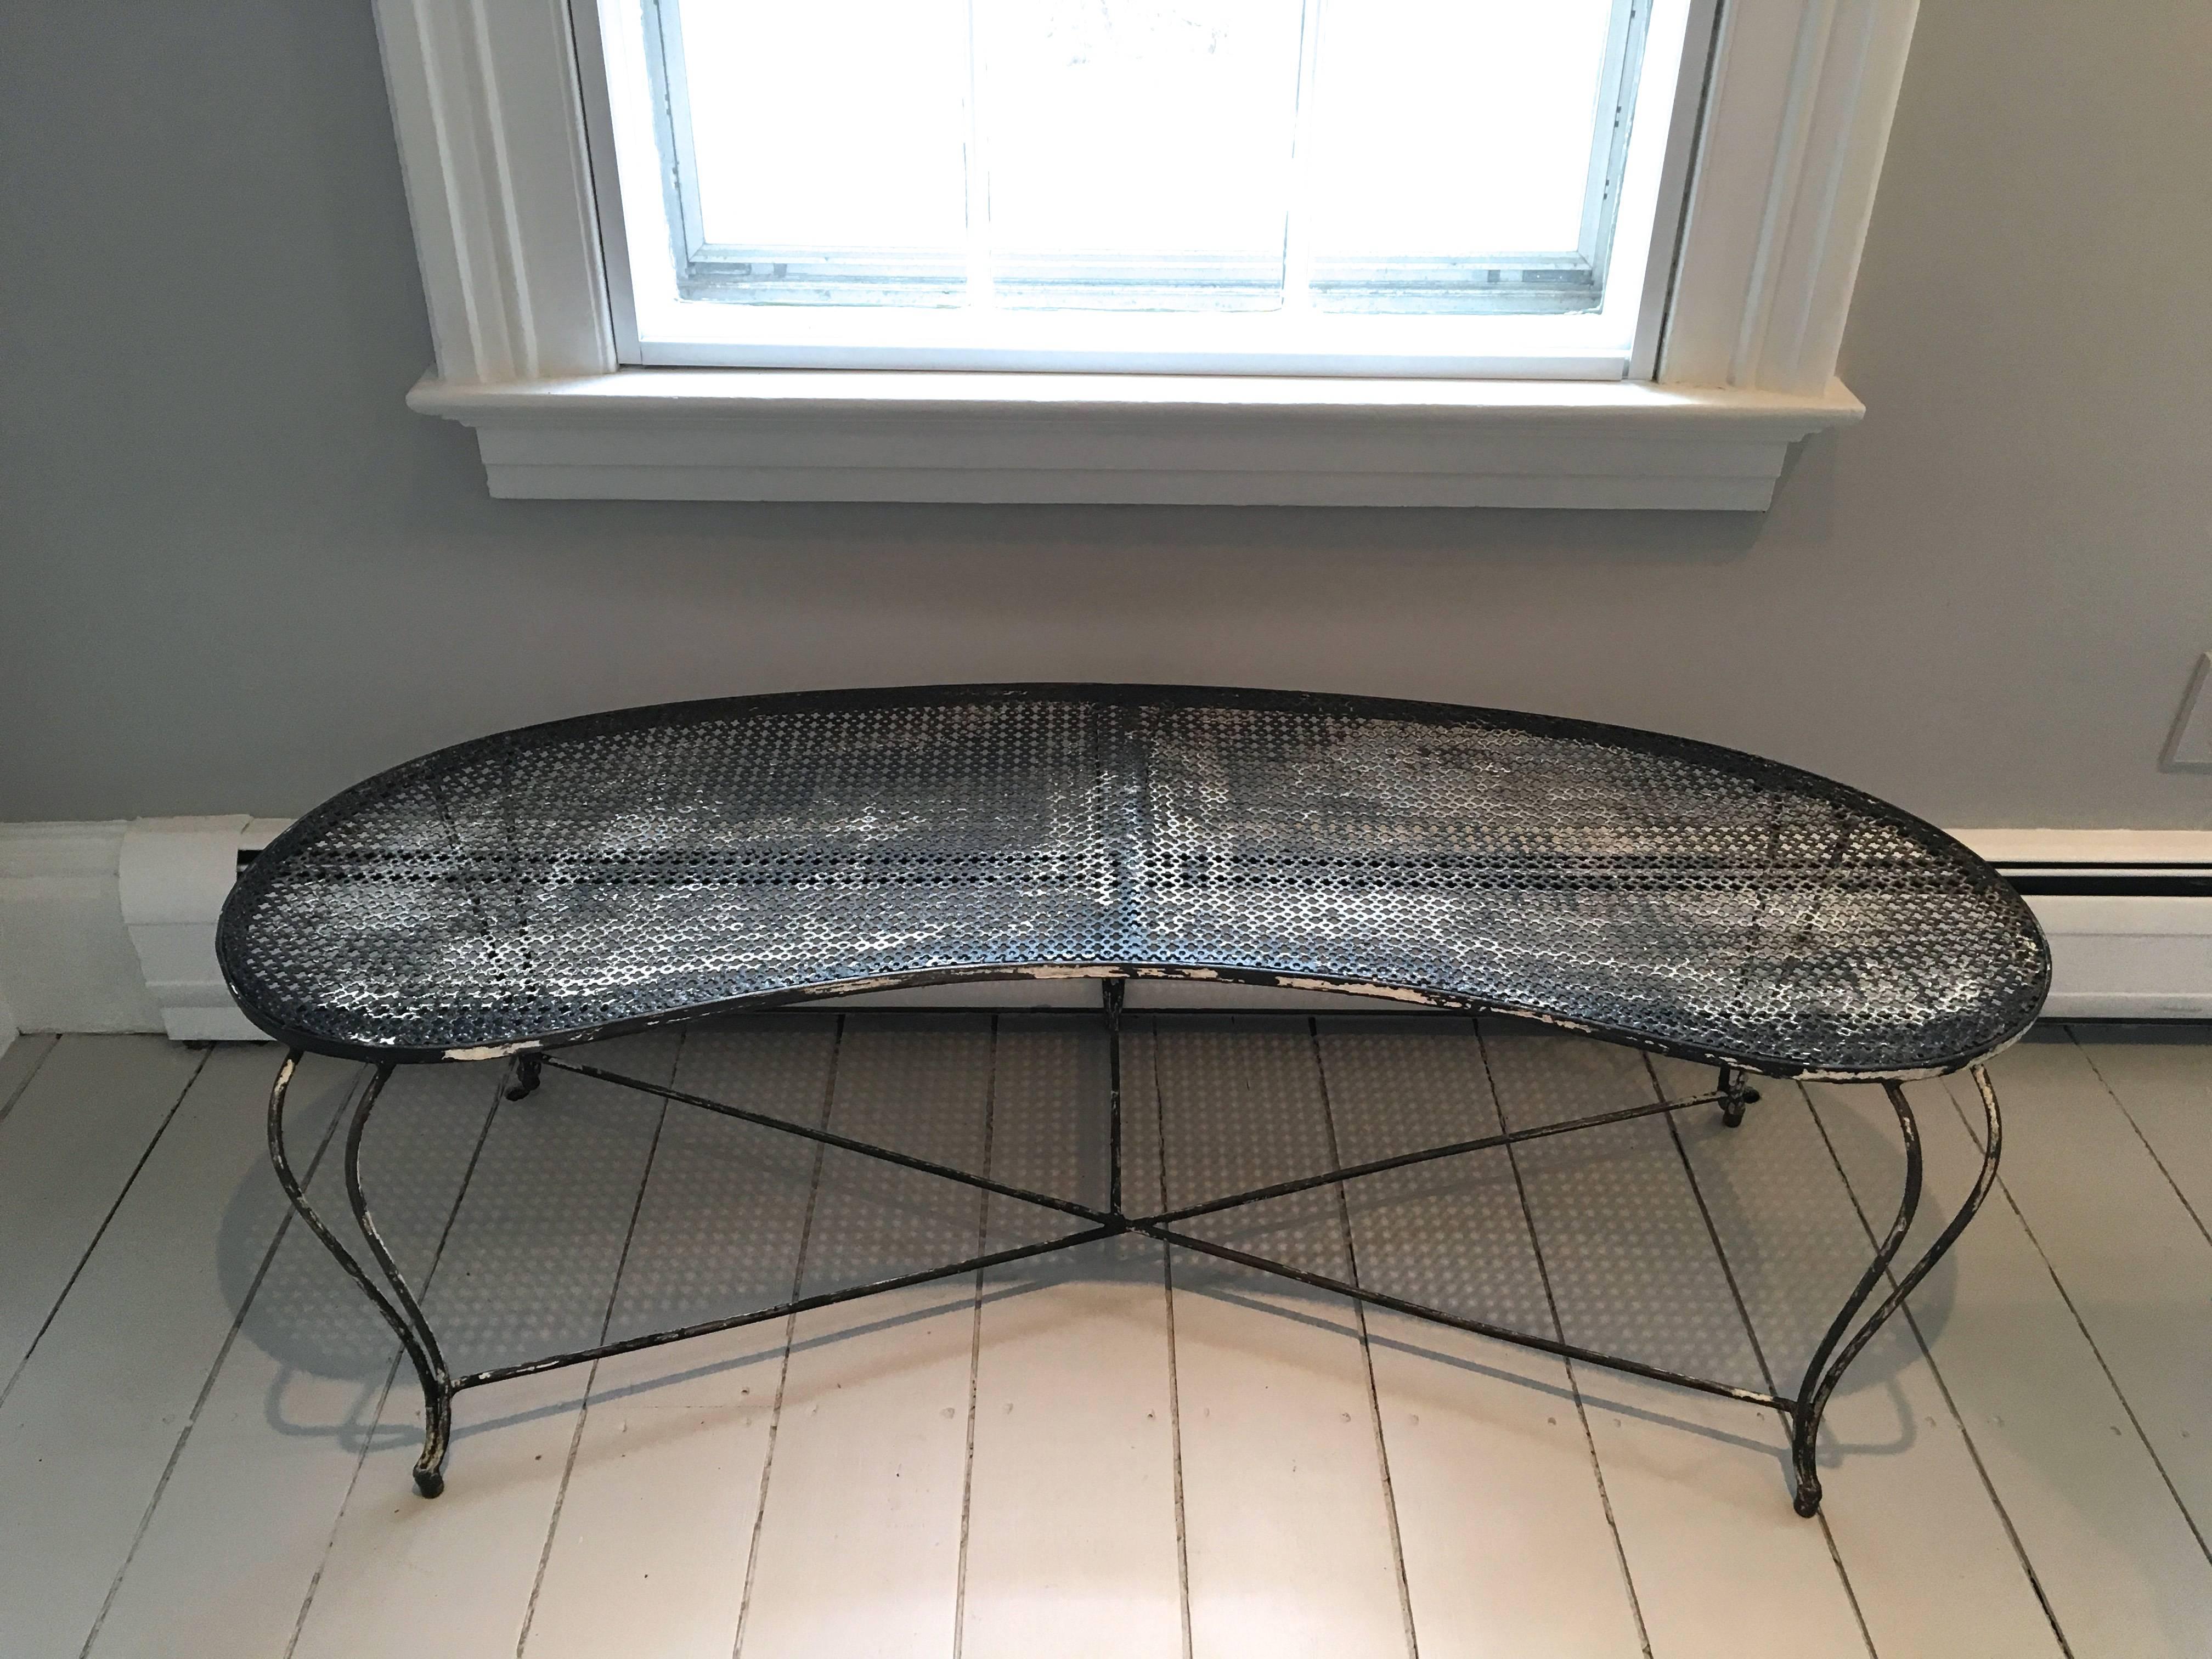 We scored two pairs of these sinuous, kidney-shaped steel benches with cabriole legs in the North of France. Made of steel and dating to the 1950s, they are in perfect condition and feature their original black and white painted surface. Extremely